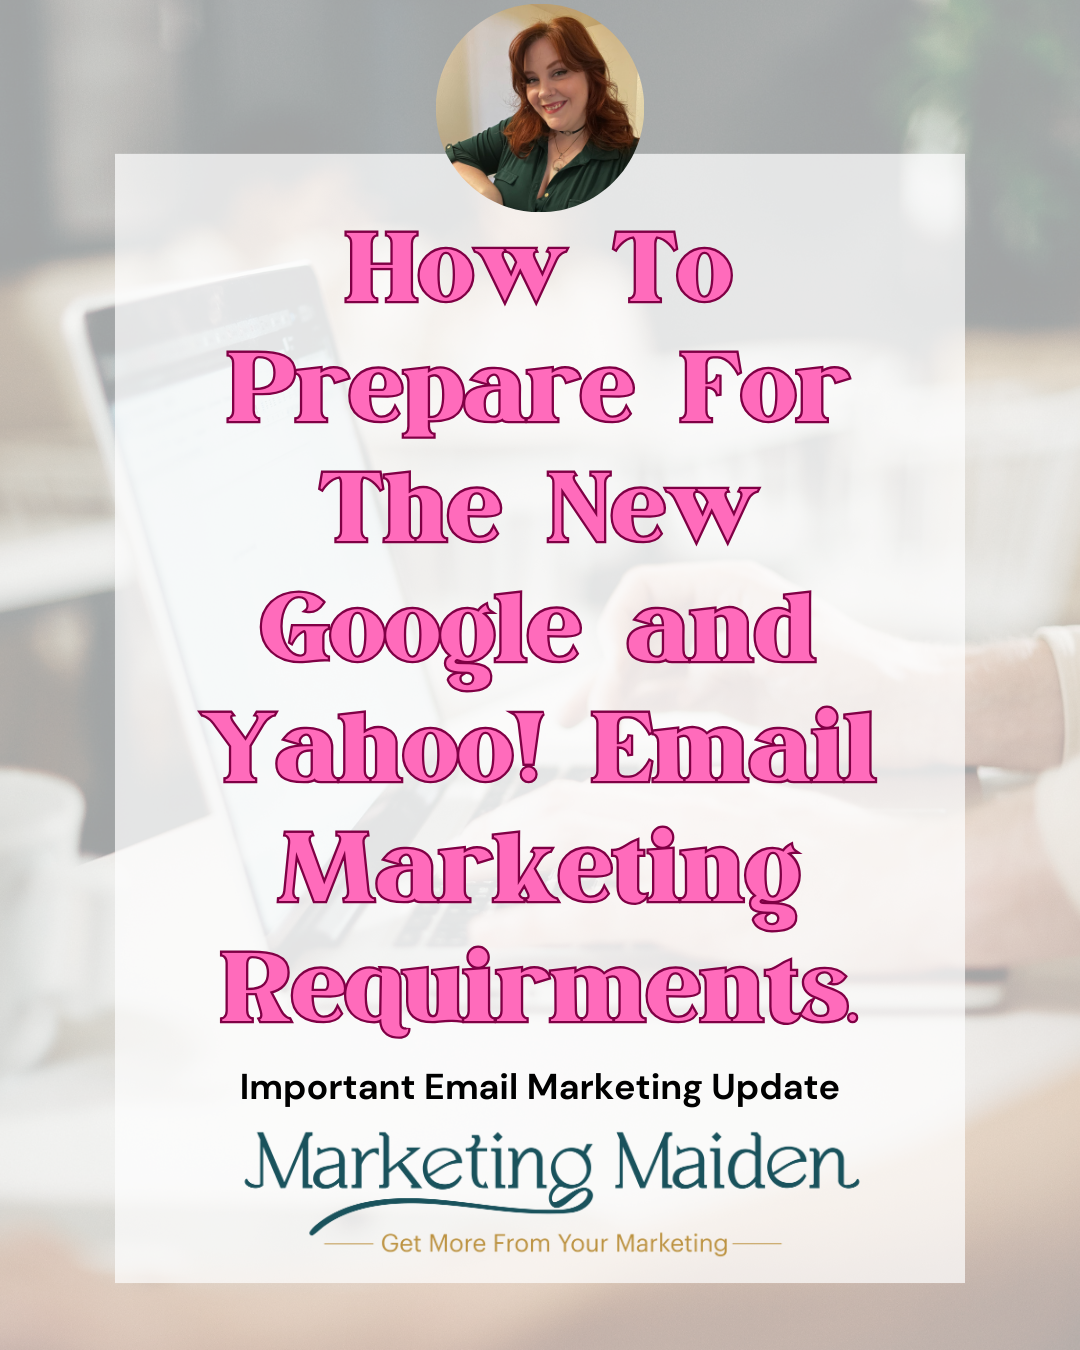 Preparing for the New Google and Yahoo Email Marketing Changes.